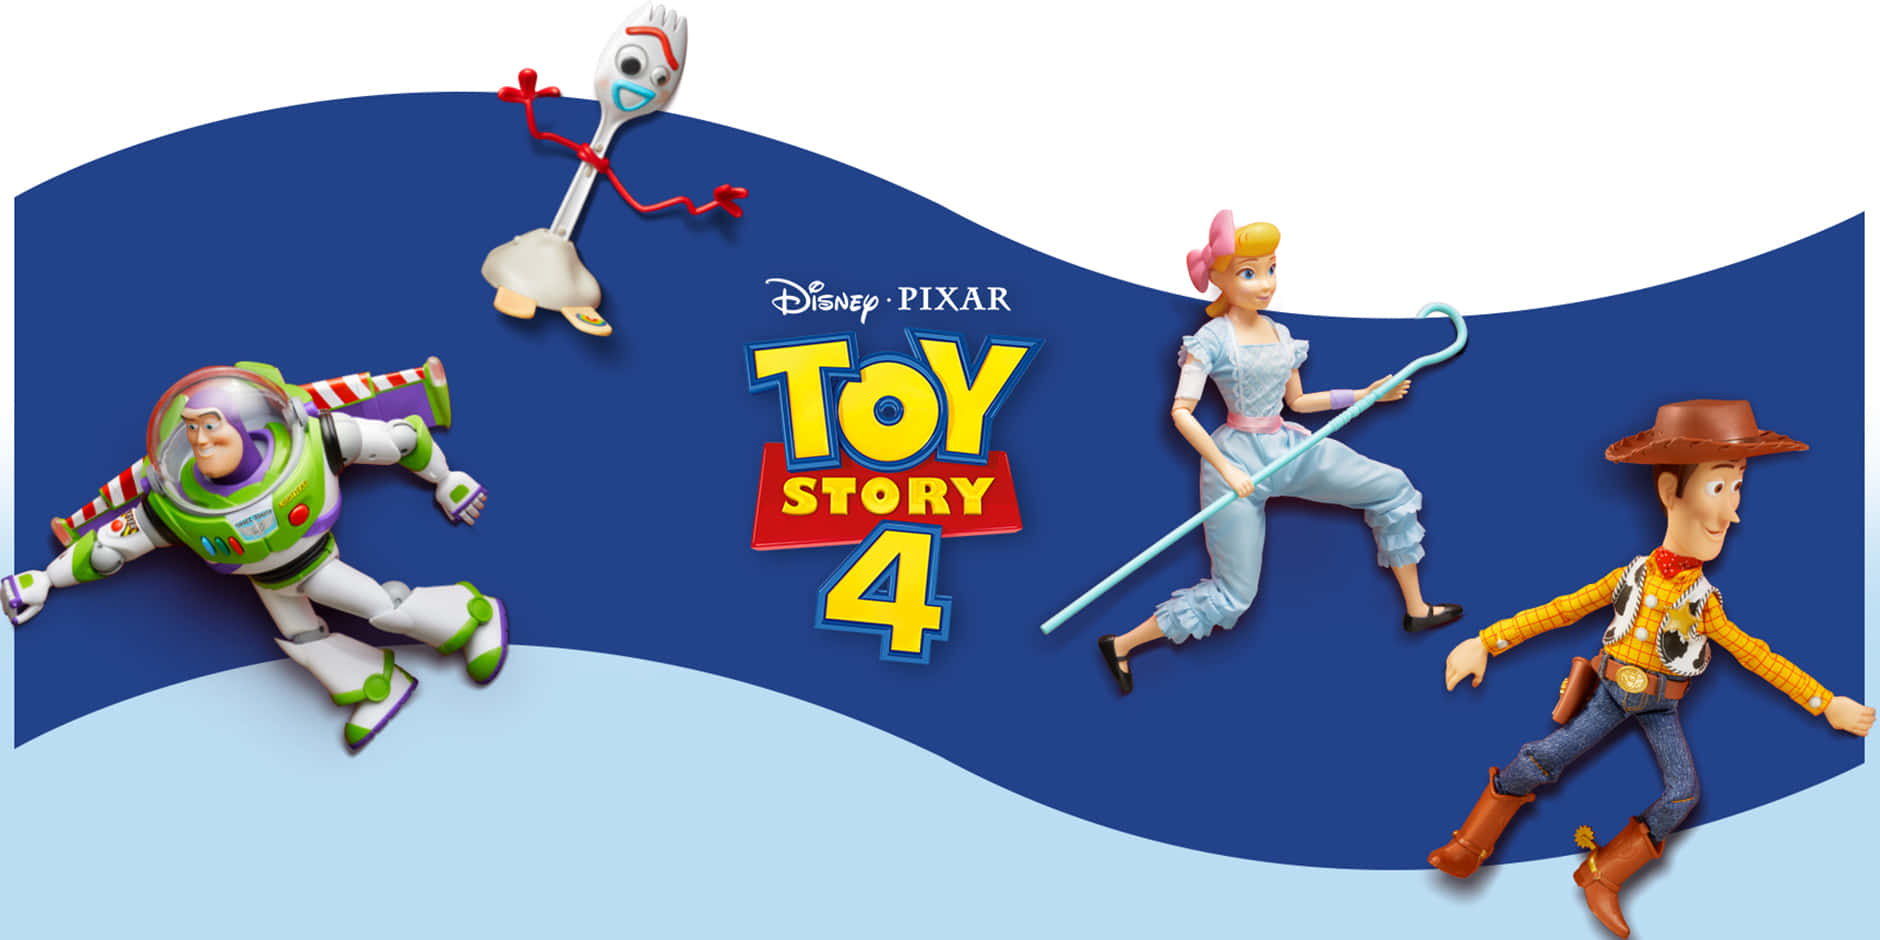 Welcome to the roadside carnival with Toy Story 4!